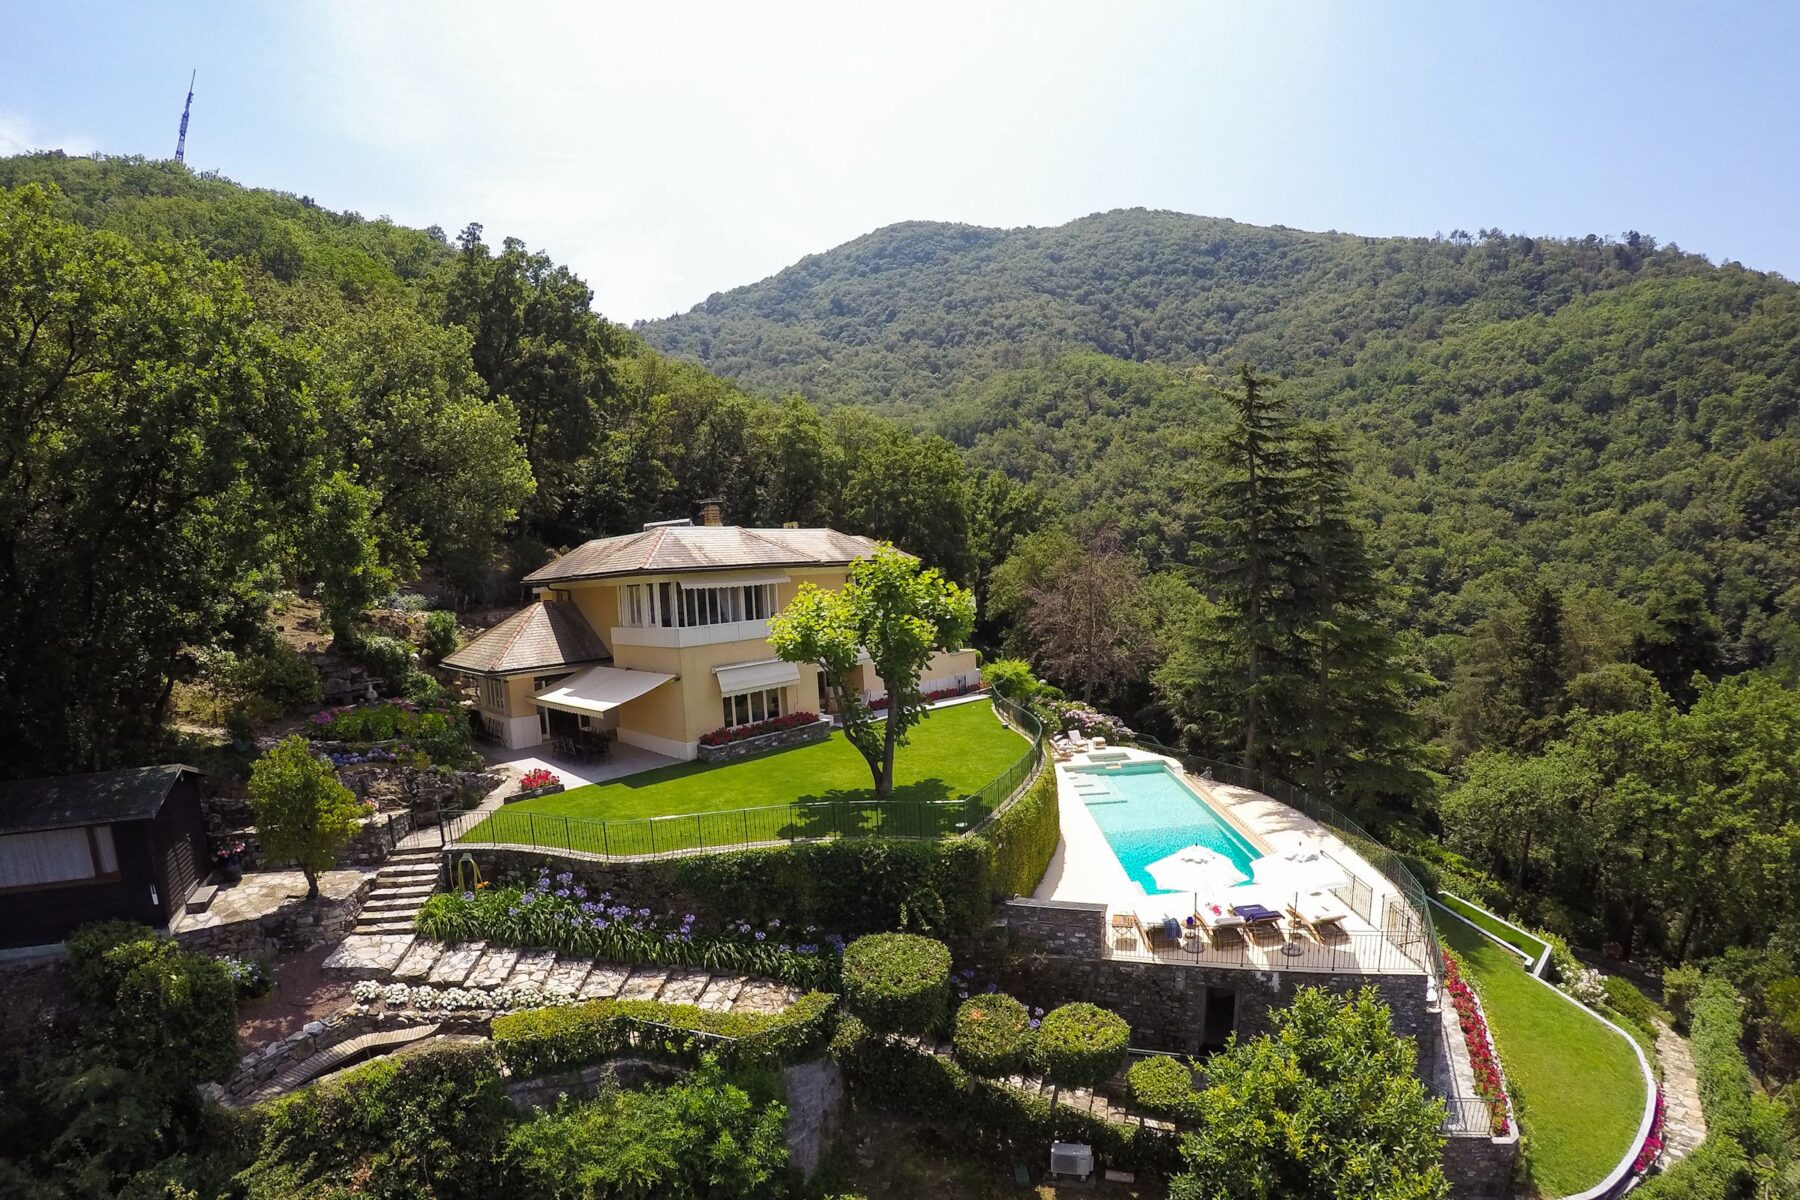 Tuscany Villa - 🎉Giuseppe is calling to say the new